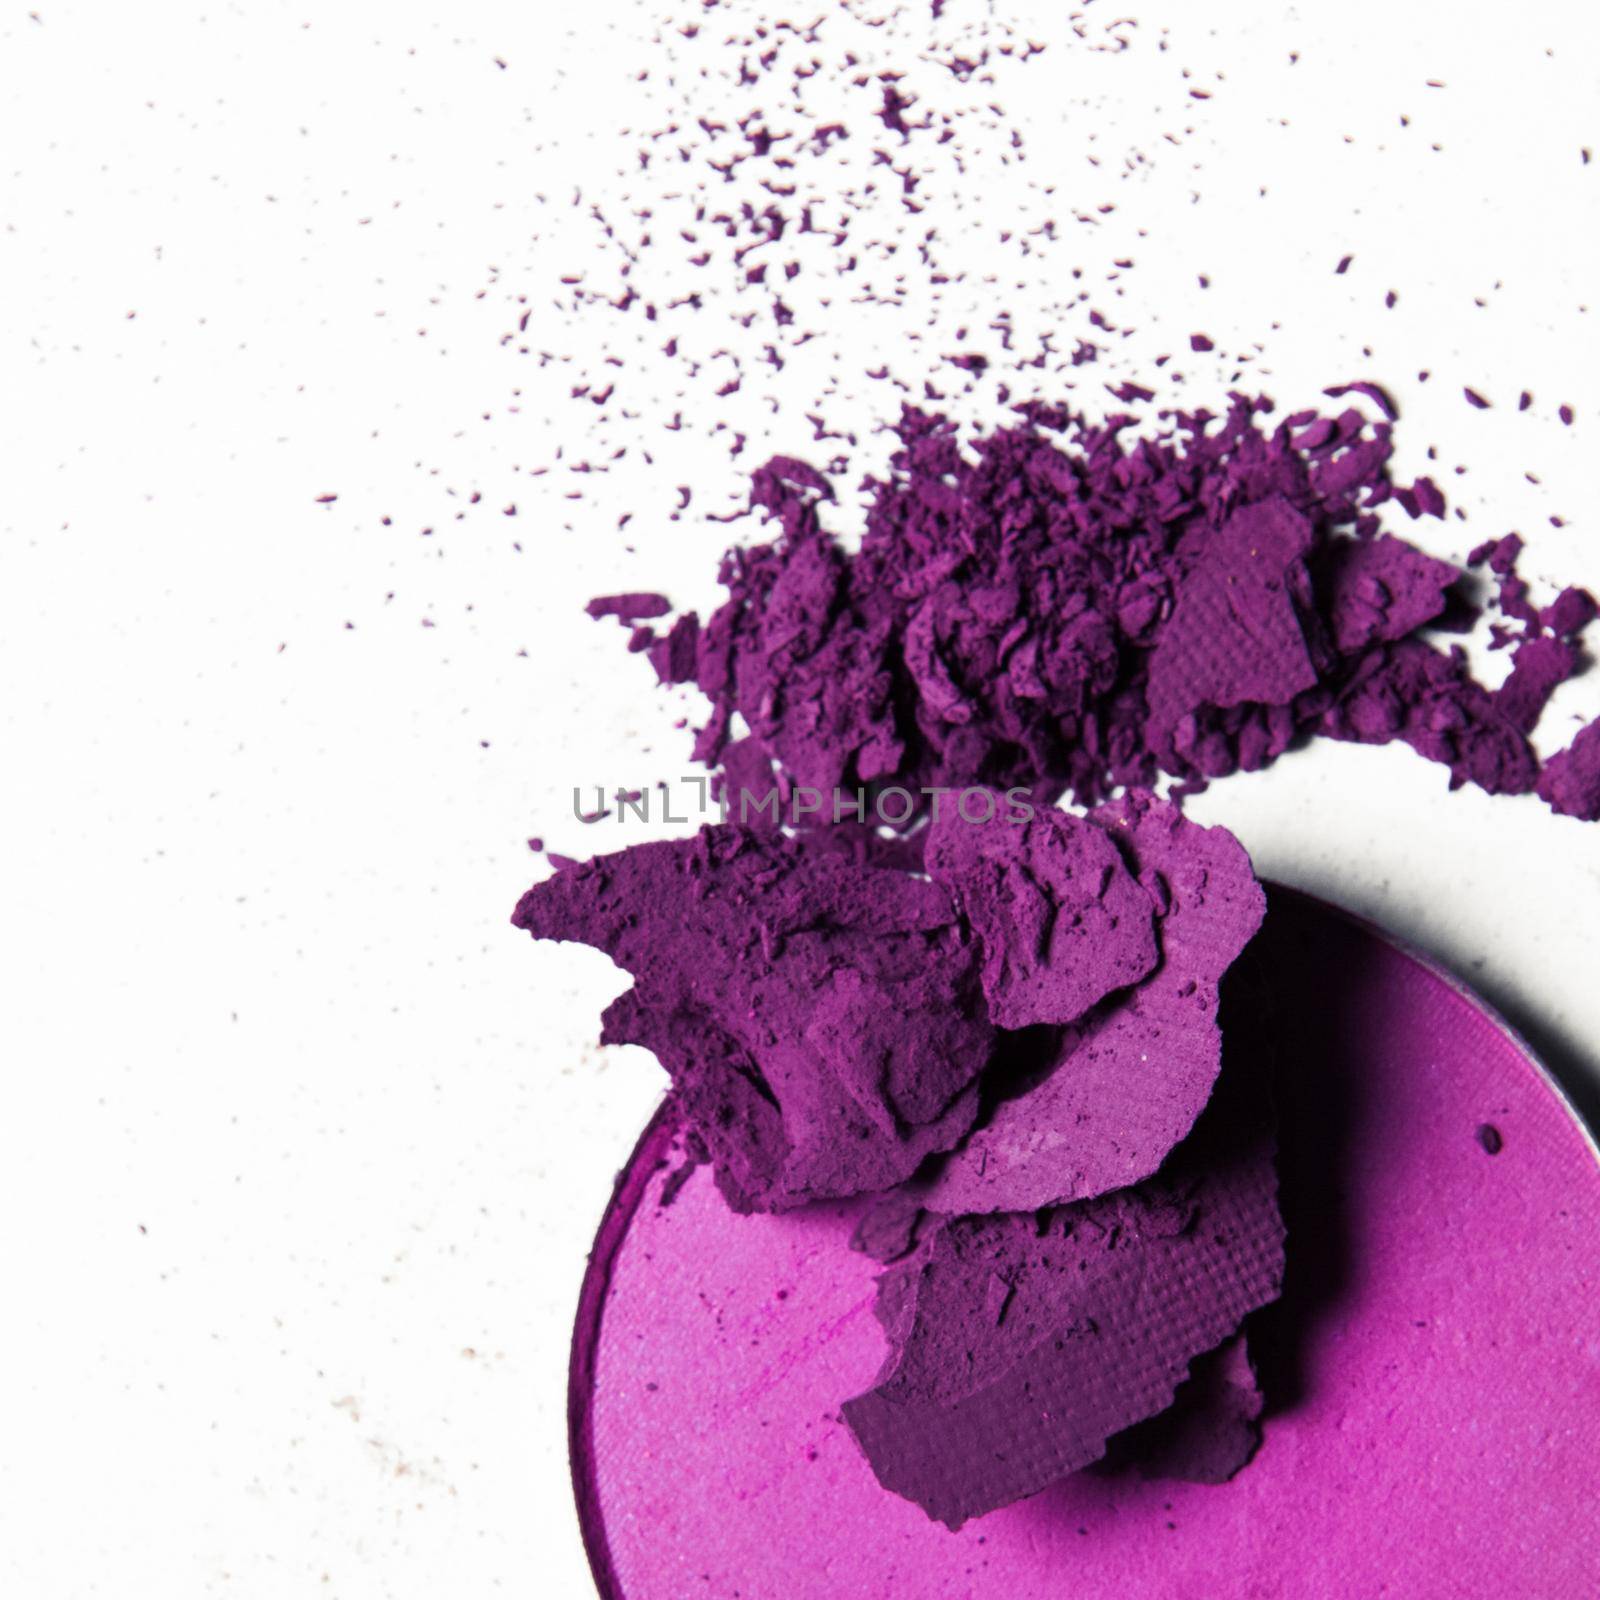 crushed make-up products - beauty and cosmetics styled concept by Anneleven